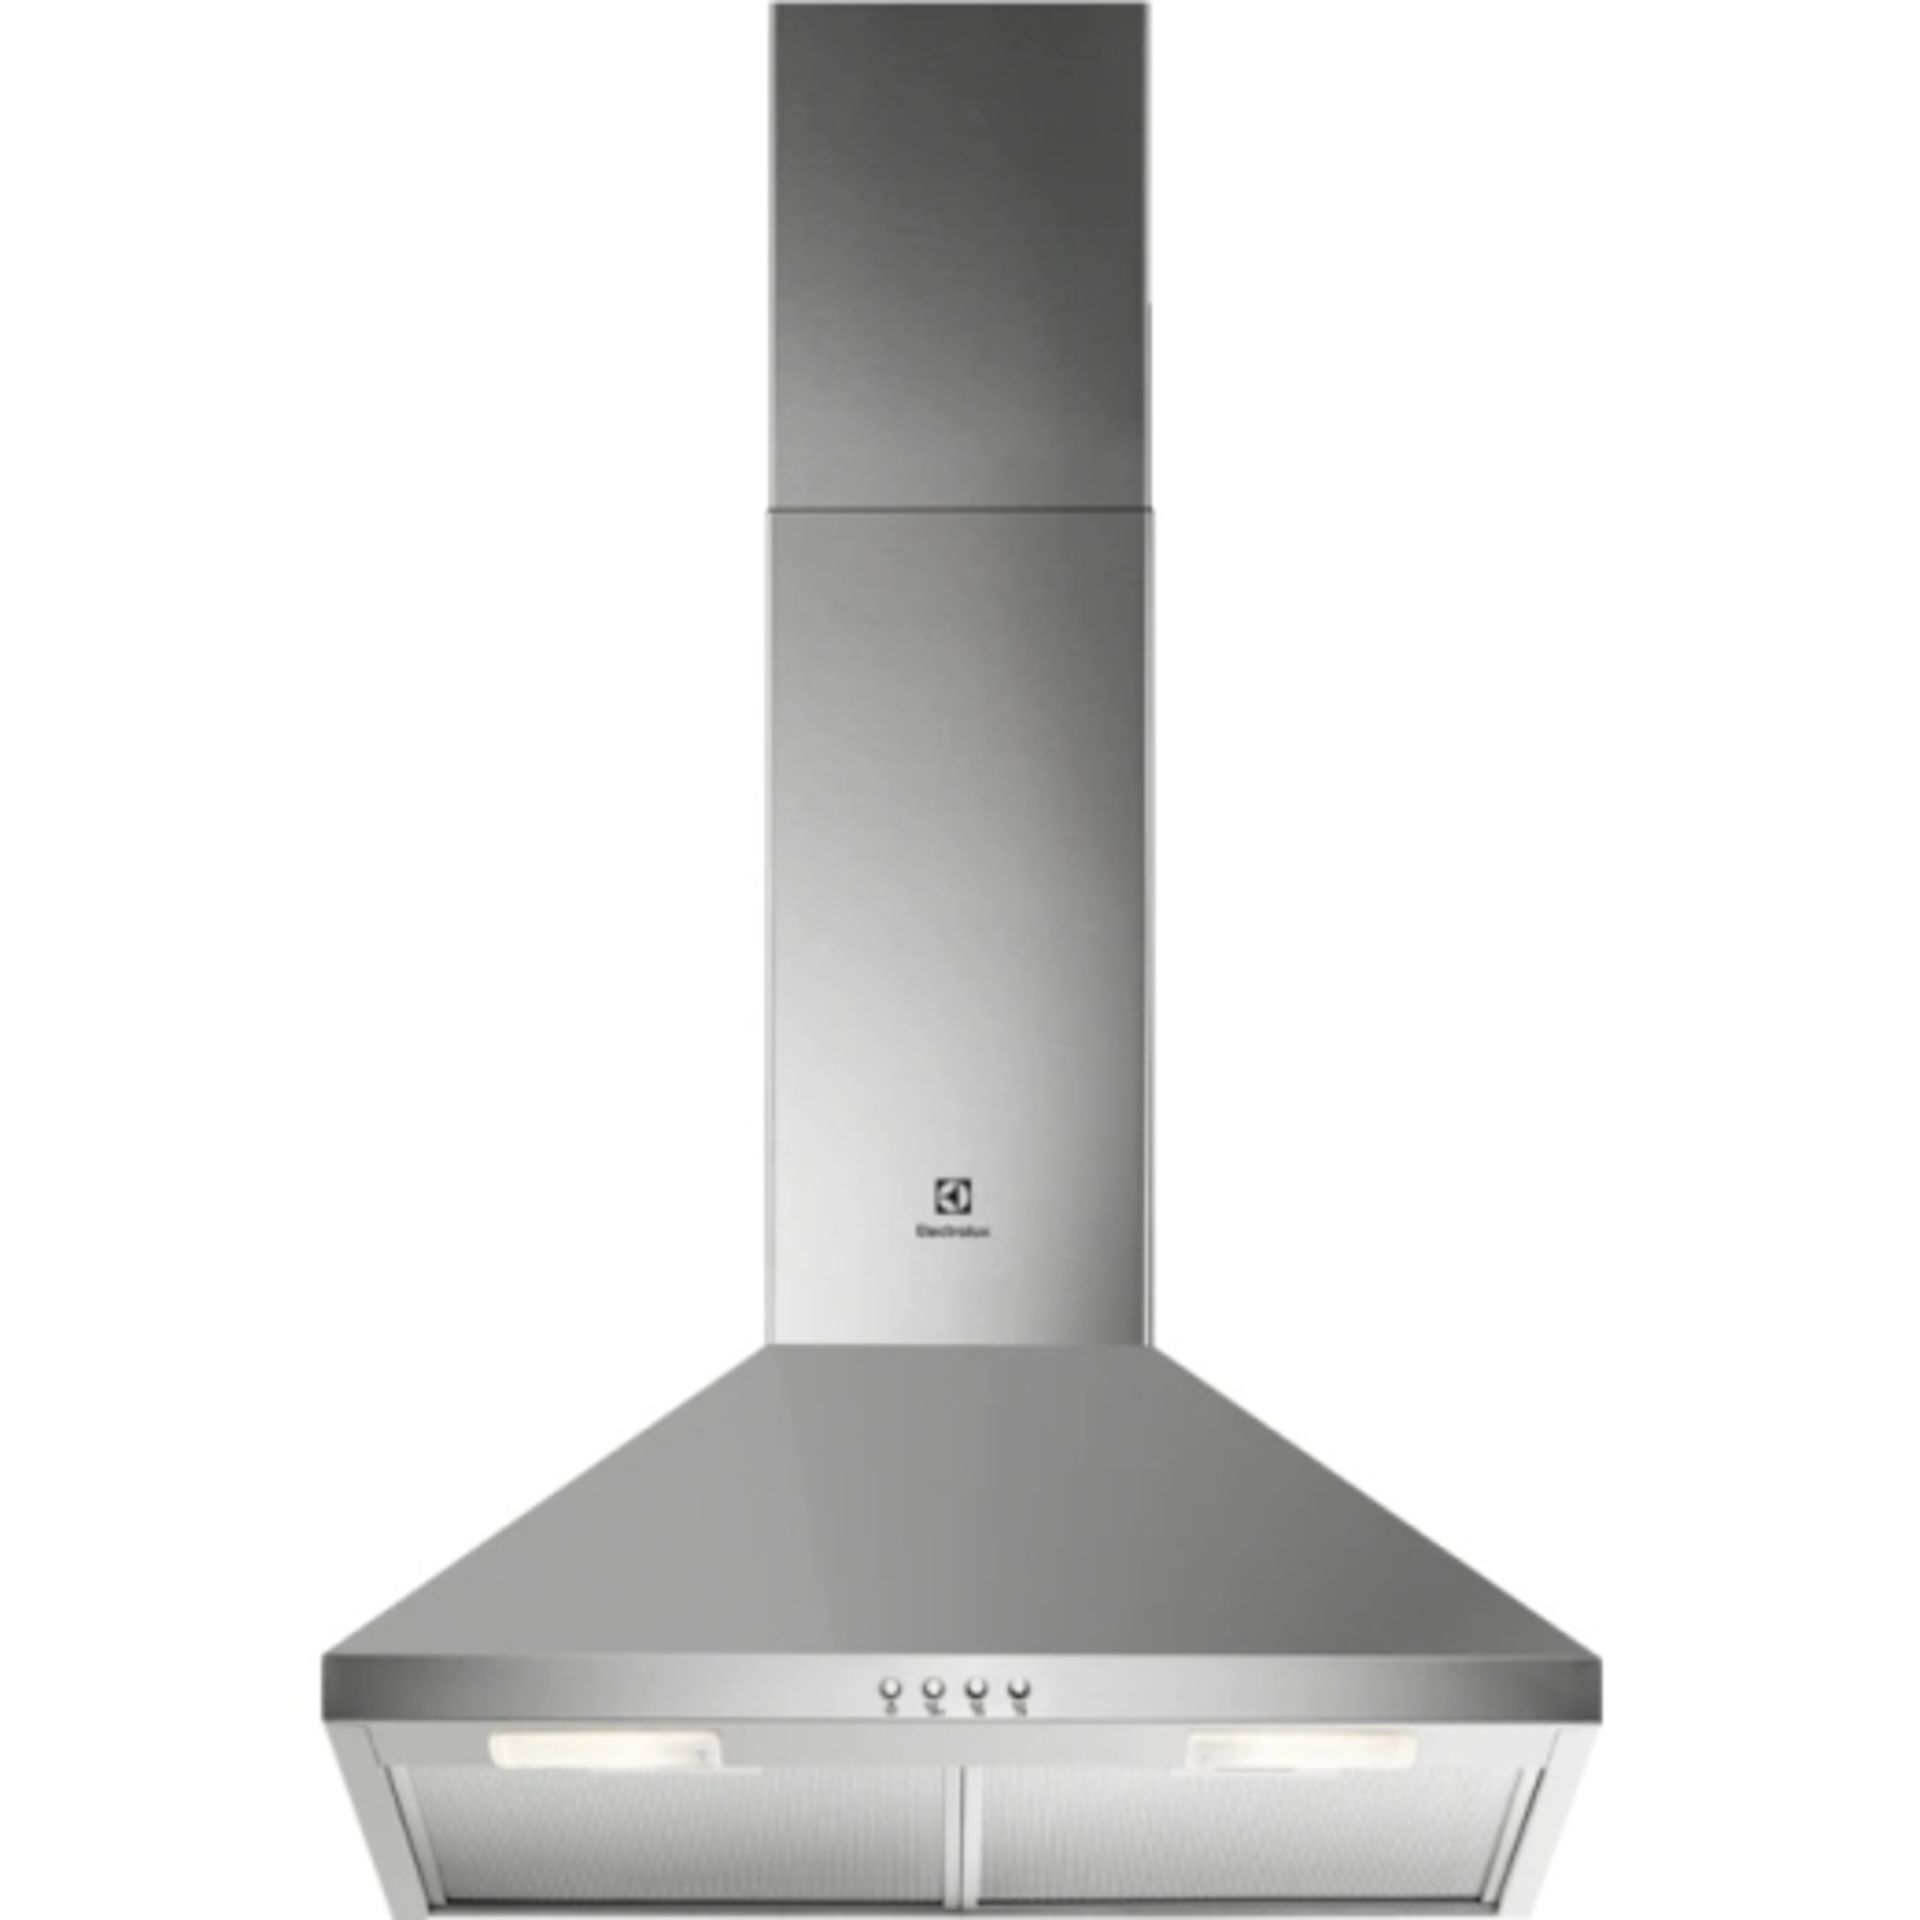 (KA27) Electrolux hob extractor Installation: Chimney Size: 60 Dimensions, HxWxD: 690-940x598...